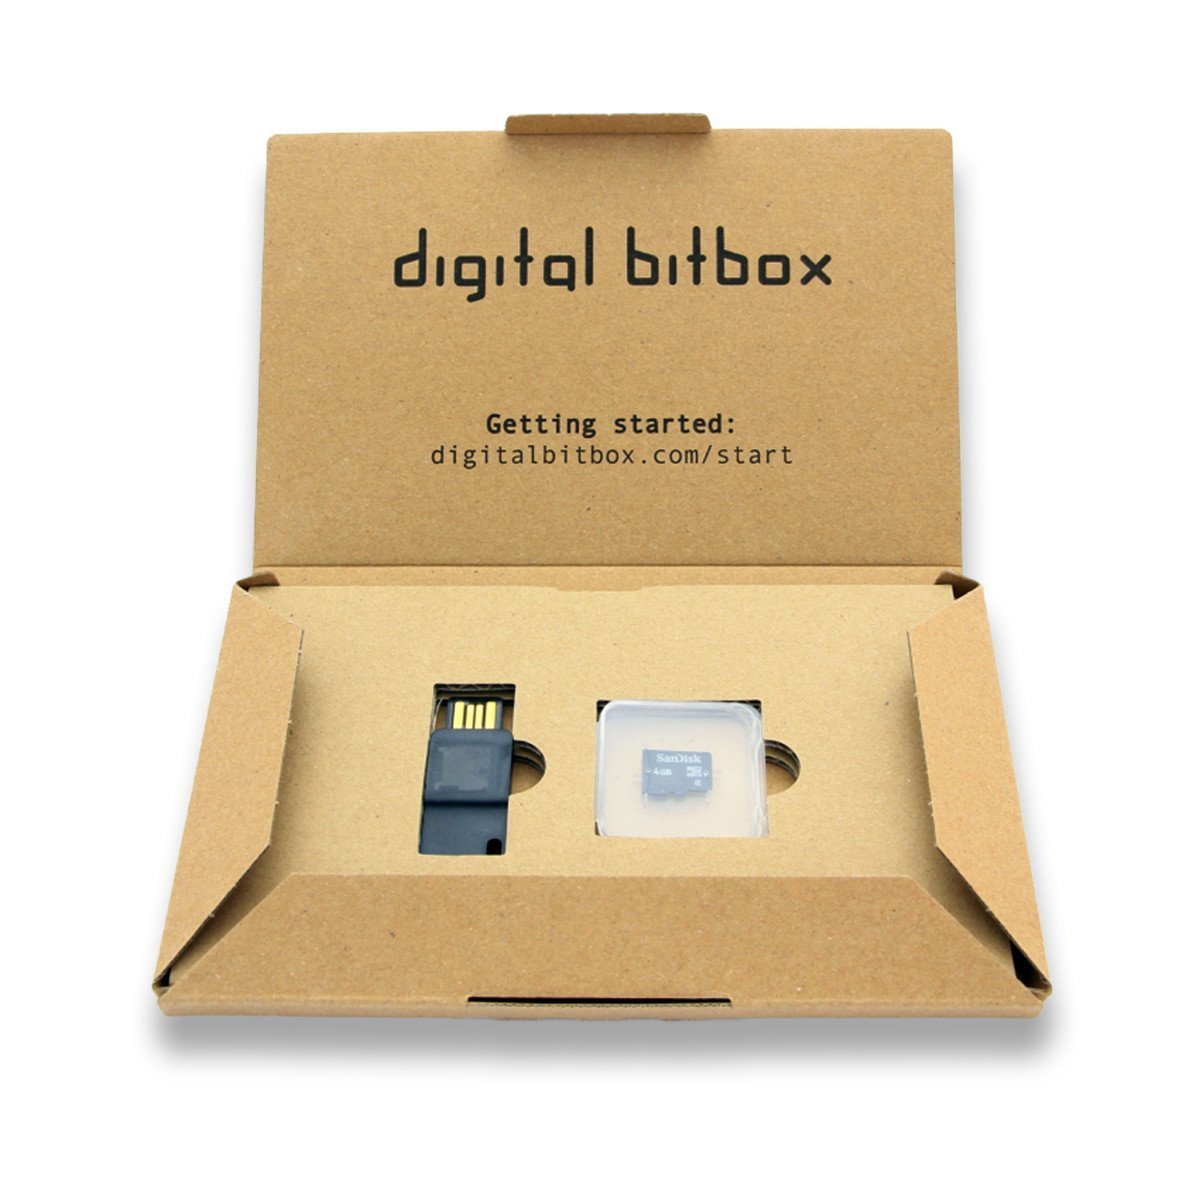 Digital BitBox - Cryptocurrency Hardware Wallet - 1st ...